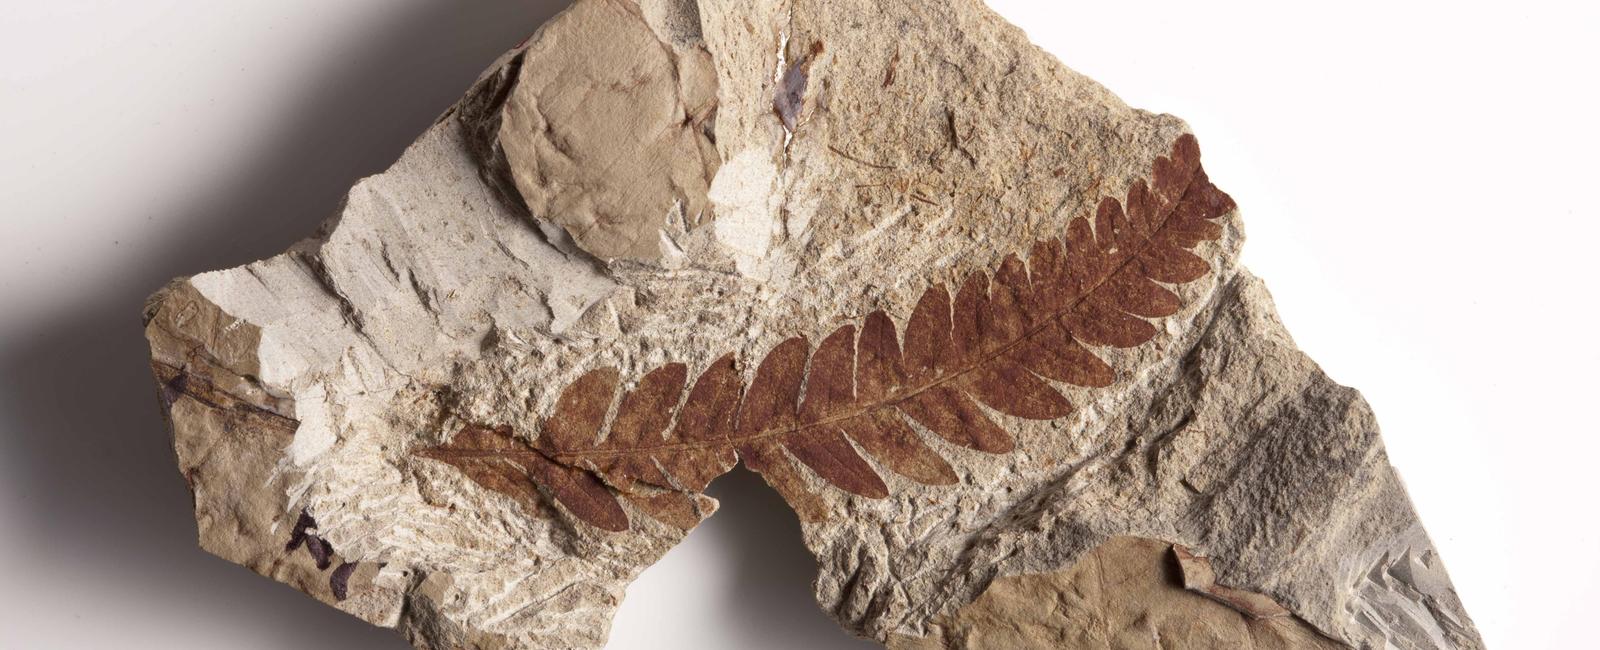 Scientists have found fossilized plants about a mile under the ice sheets of greenland the leaves moss and twigs have stayed frozen for at least the last million years